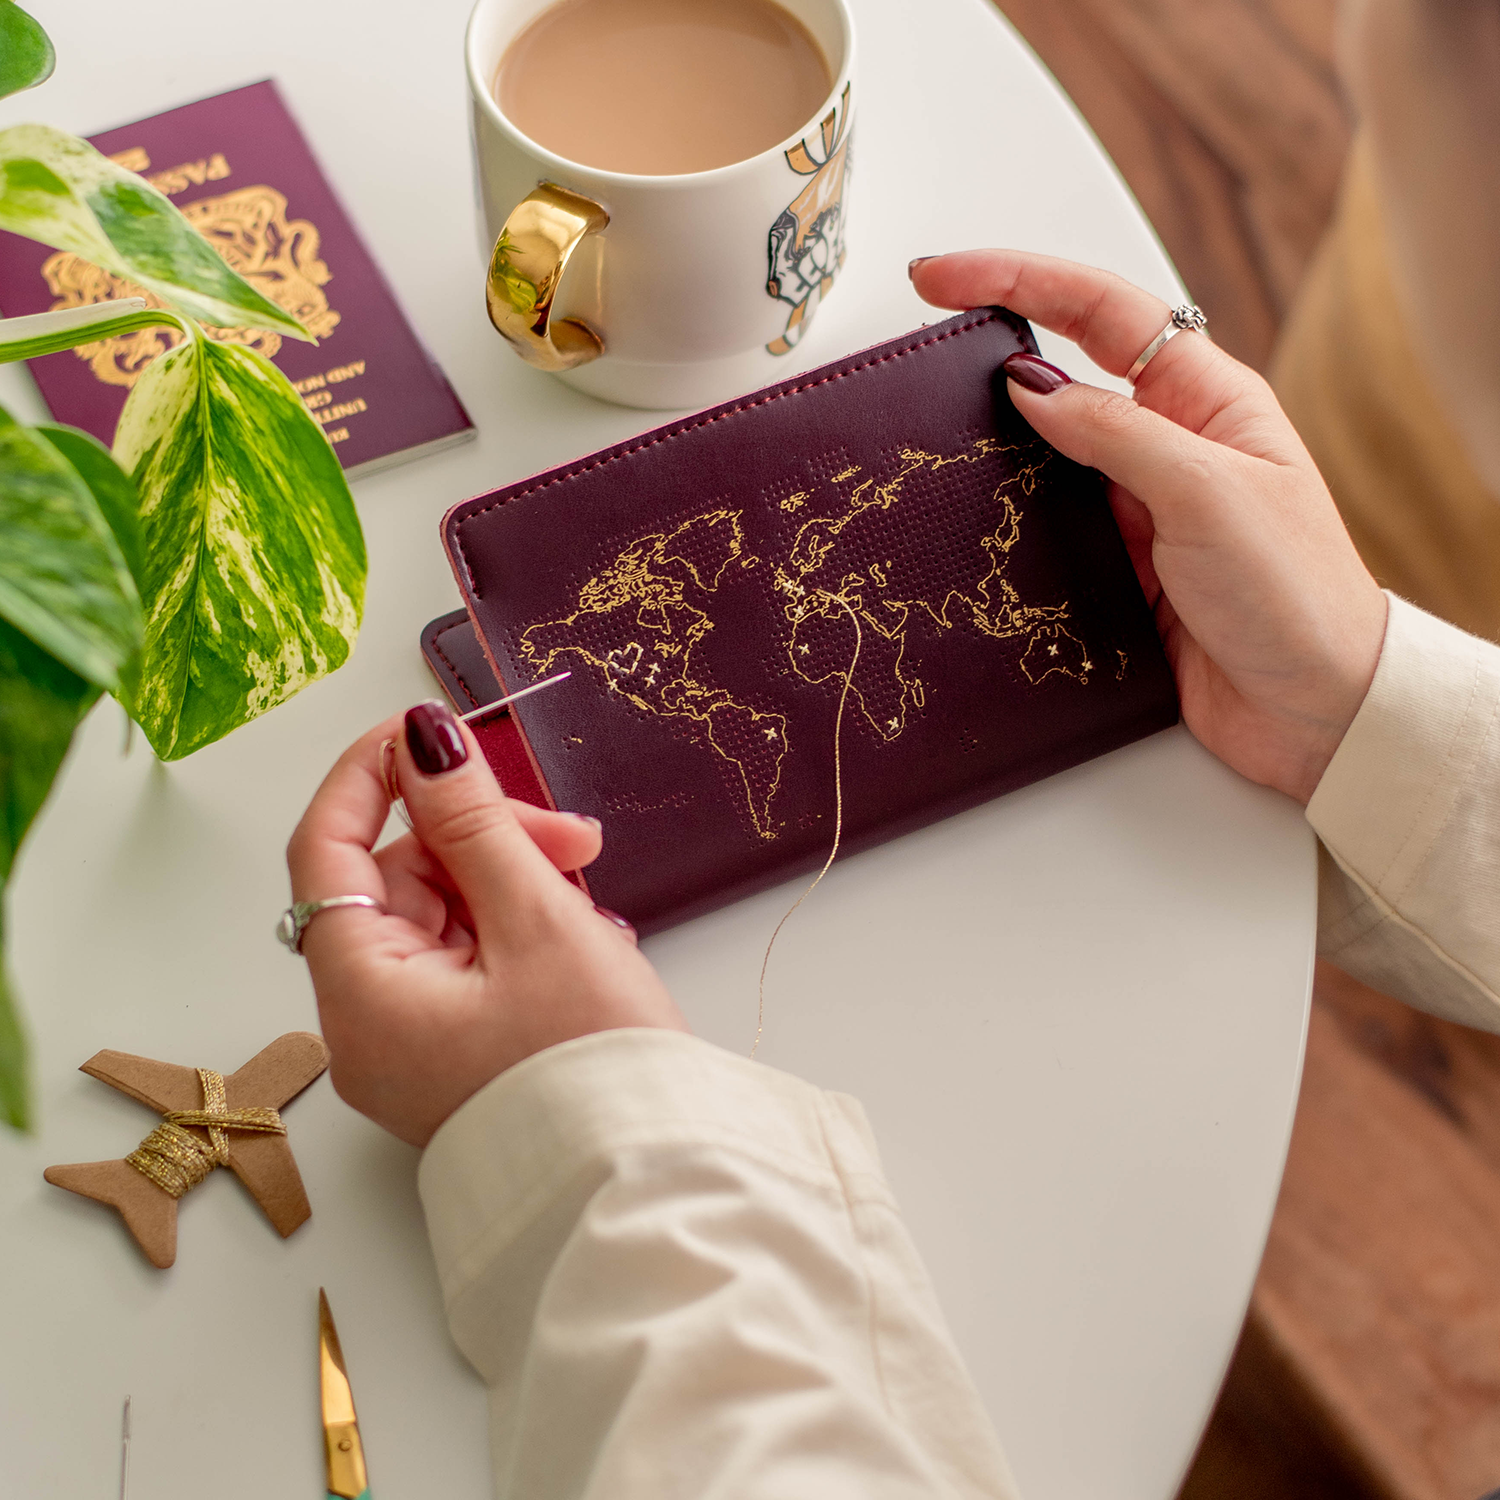 Stitch Where You've Been Passport Cover Kit - Maroon Leather - homesewn